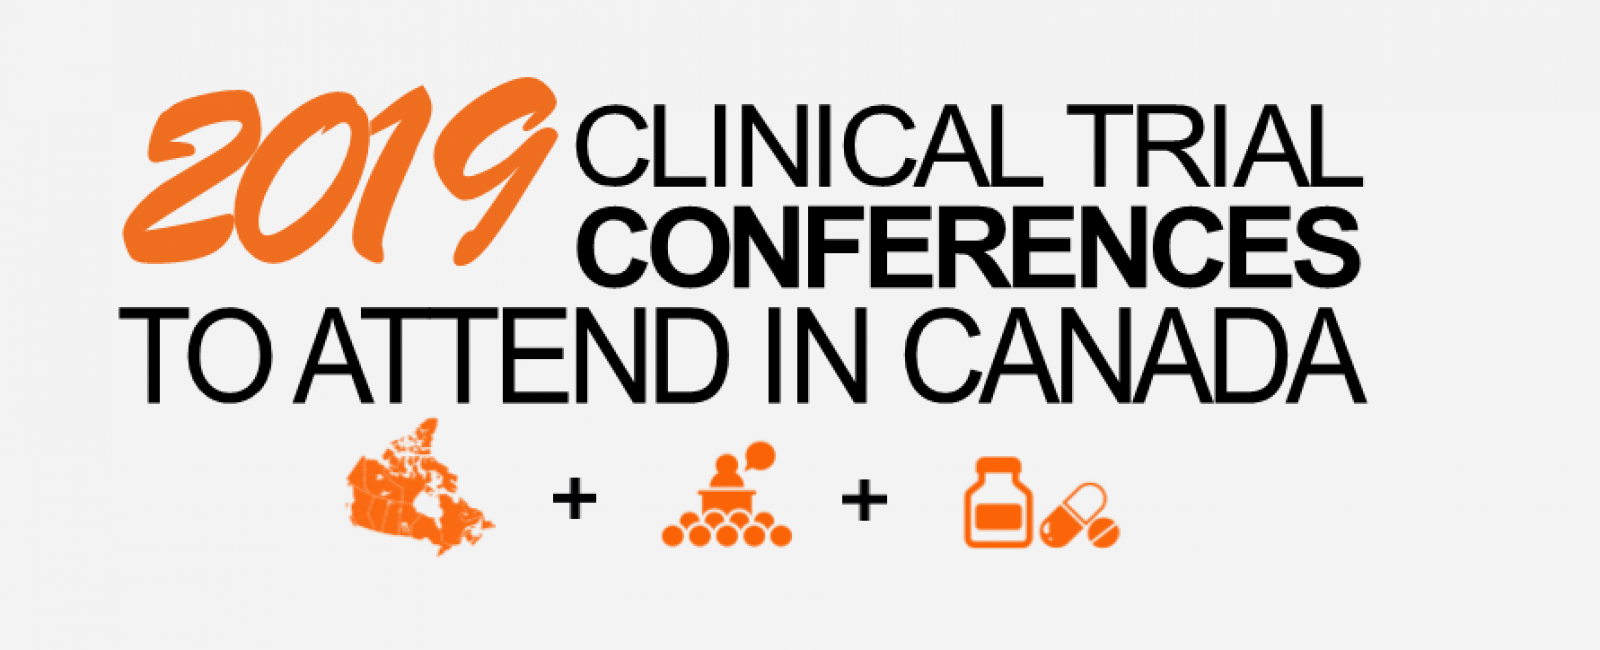 Top 2019 Clinical Trial and Pharma Conferences to attend in Canada